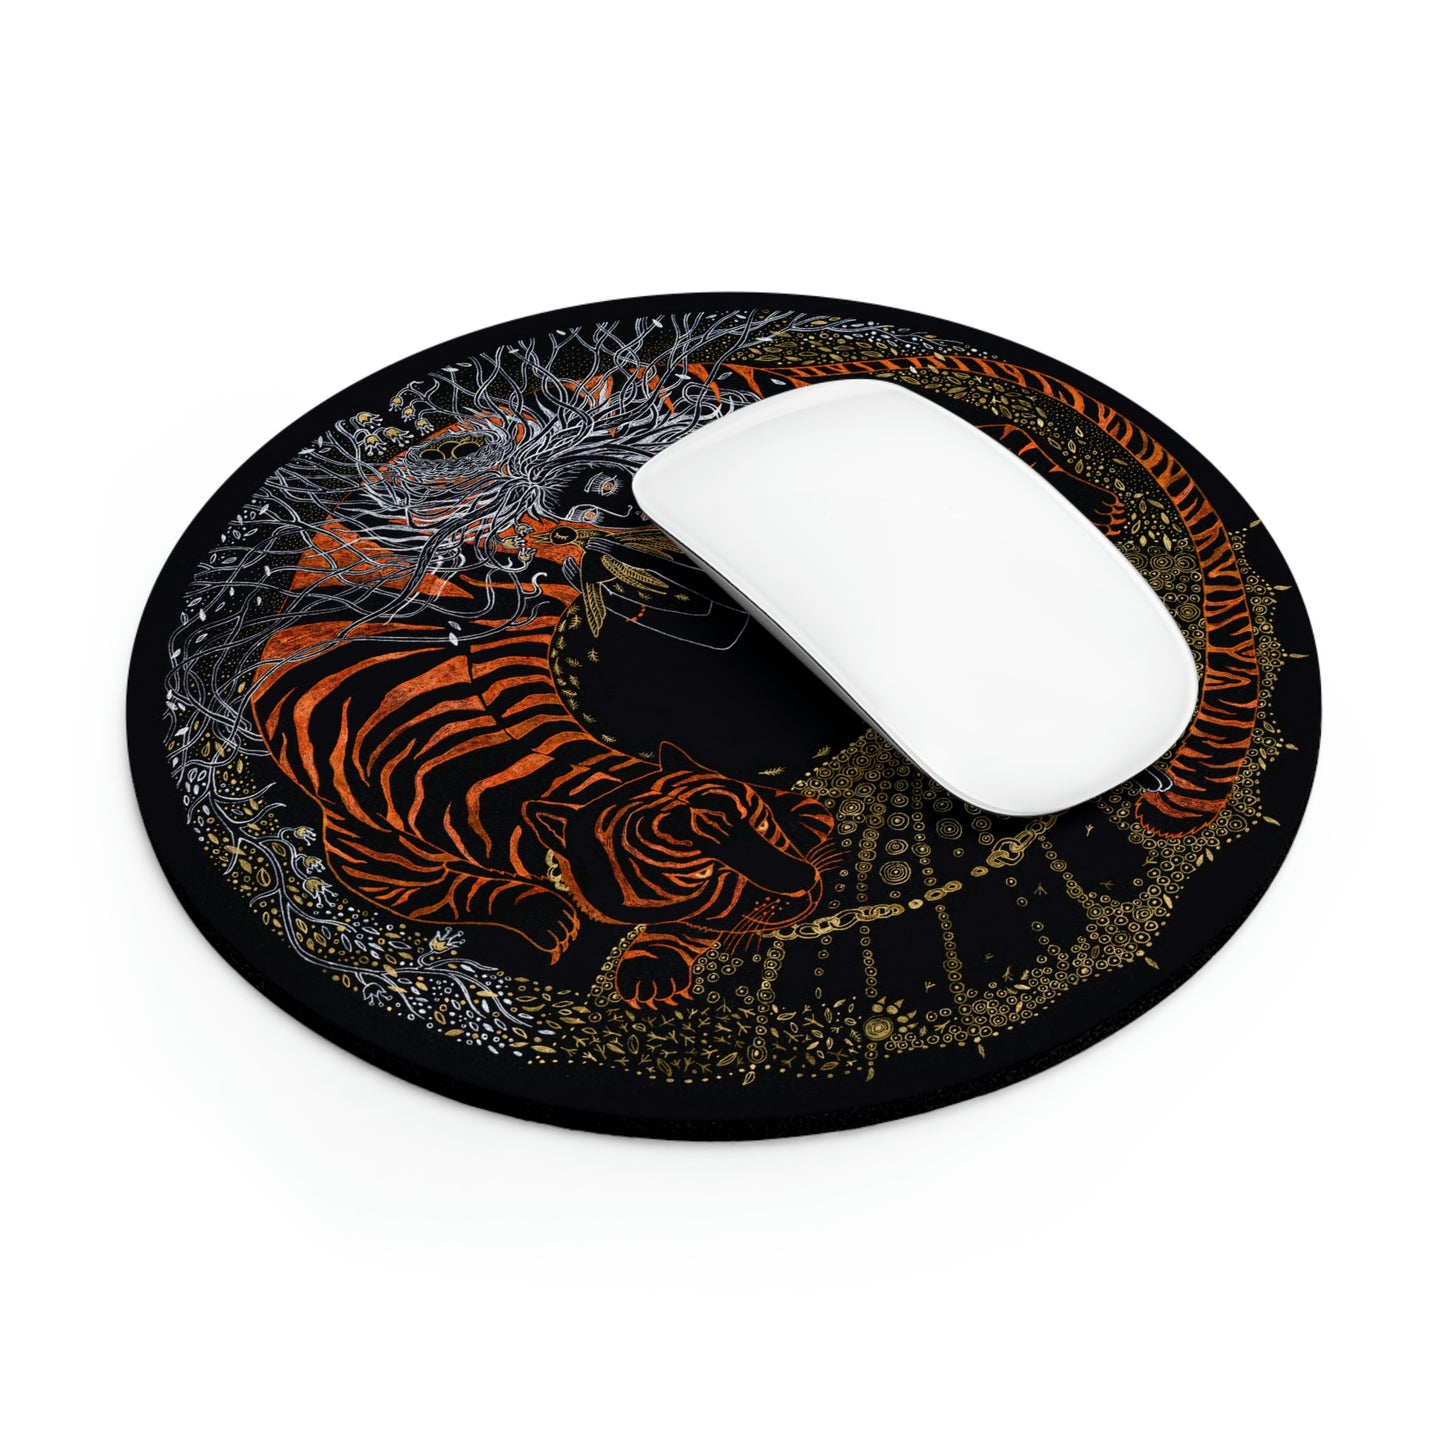 Chinese Zodiac Sign Mouse Pad (Tiger)